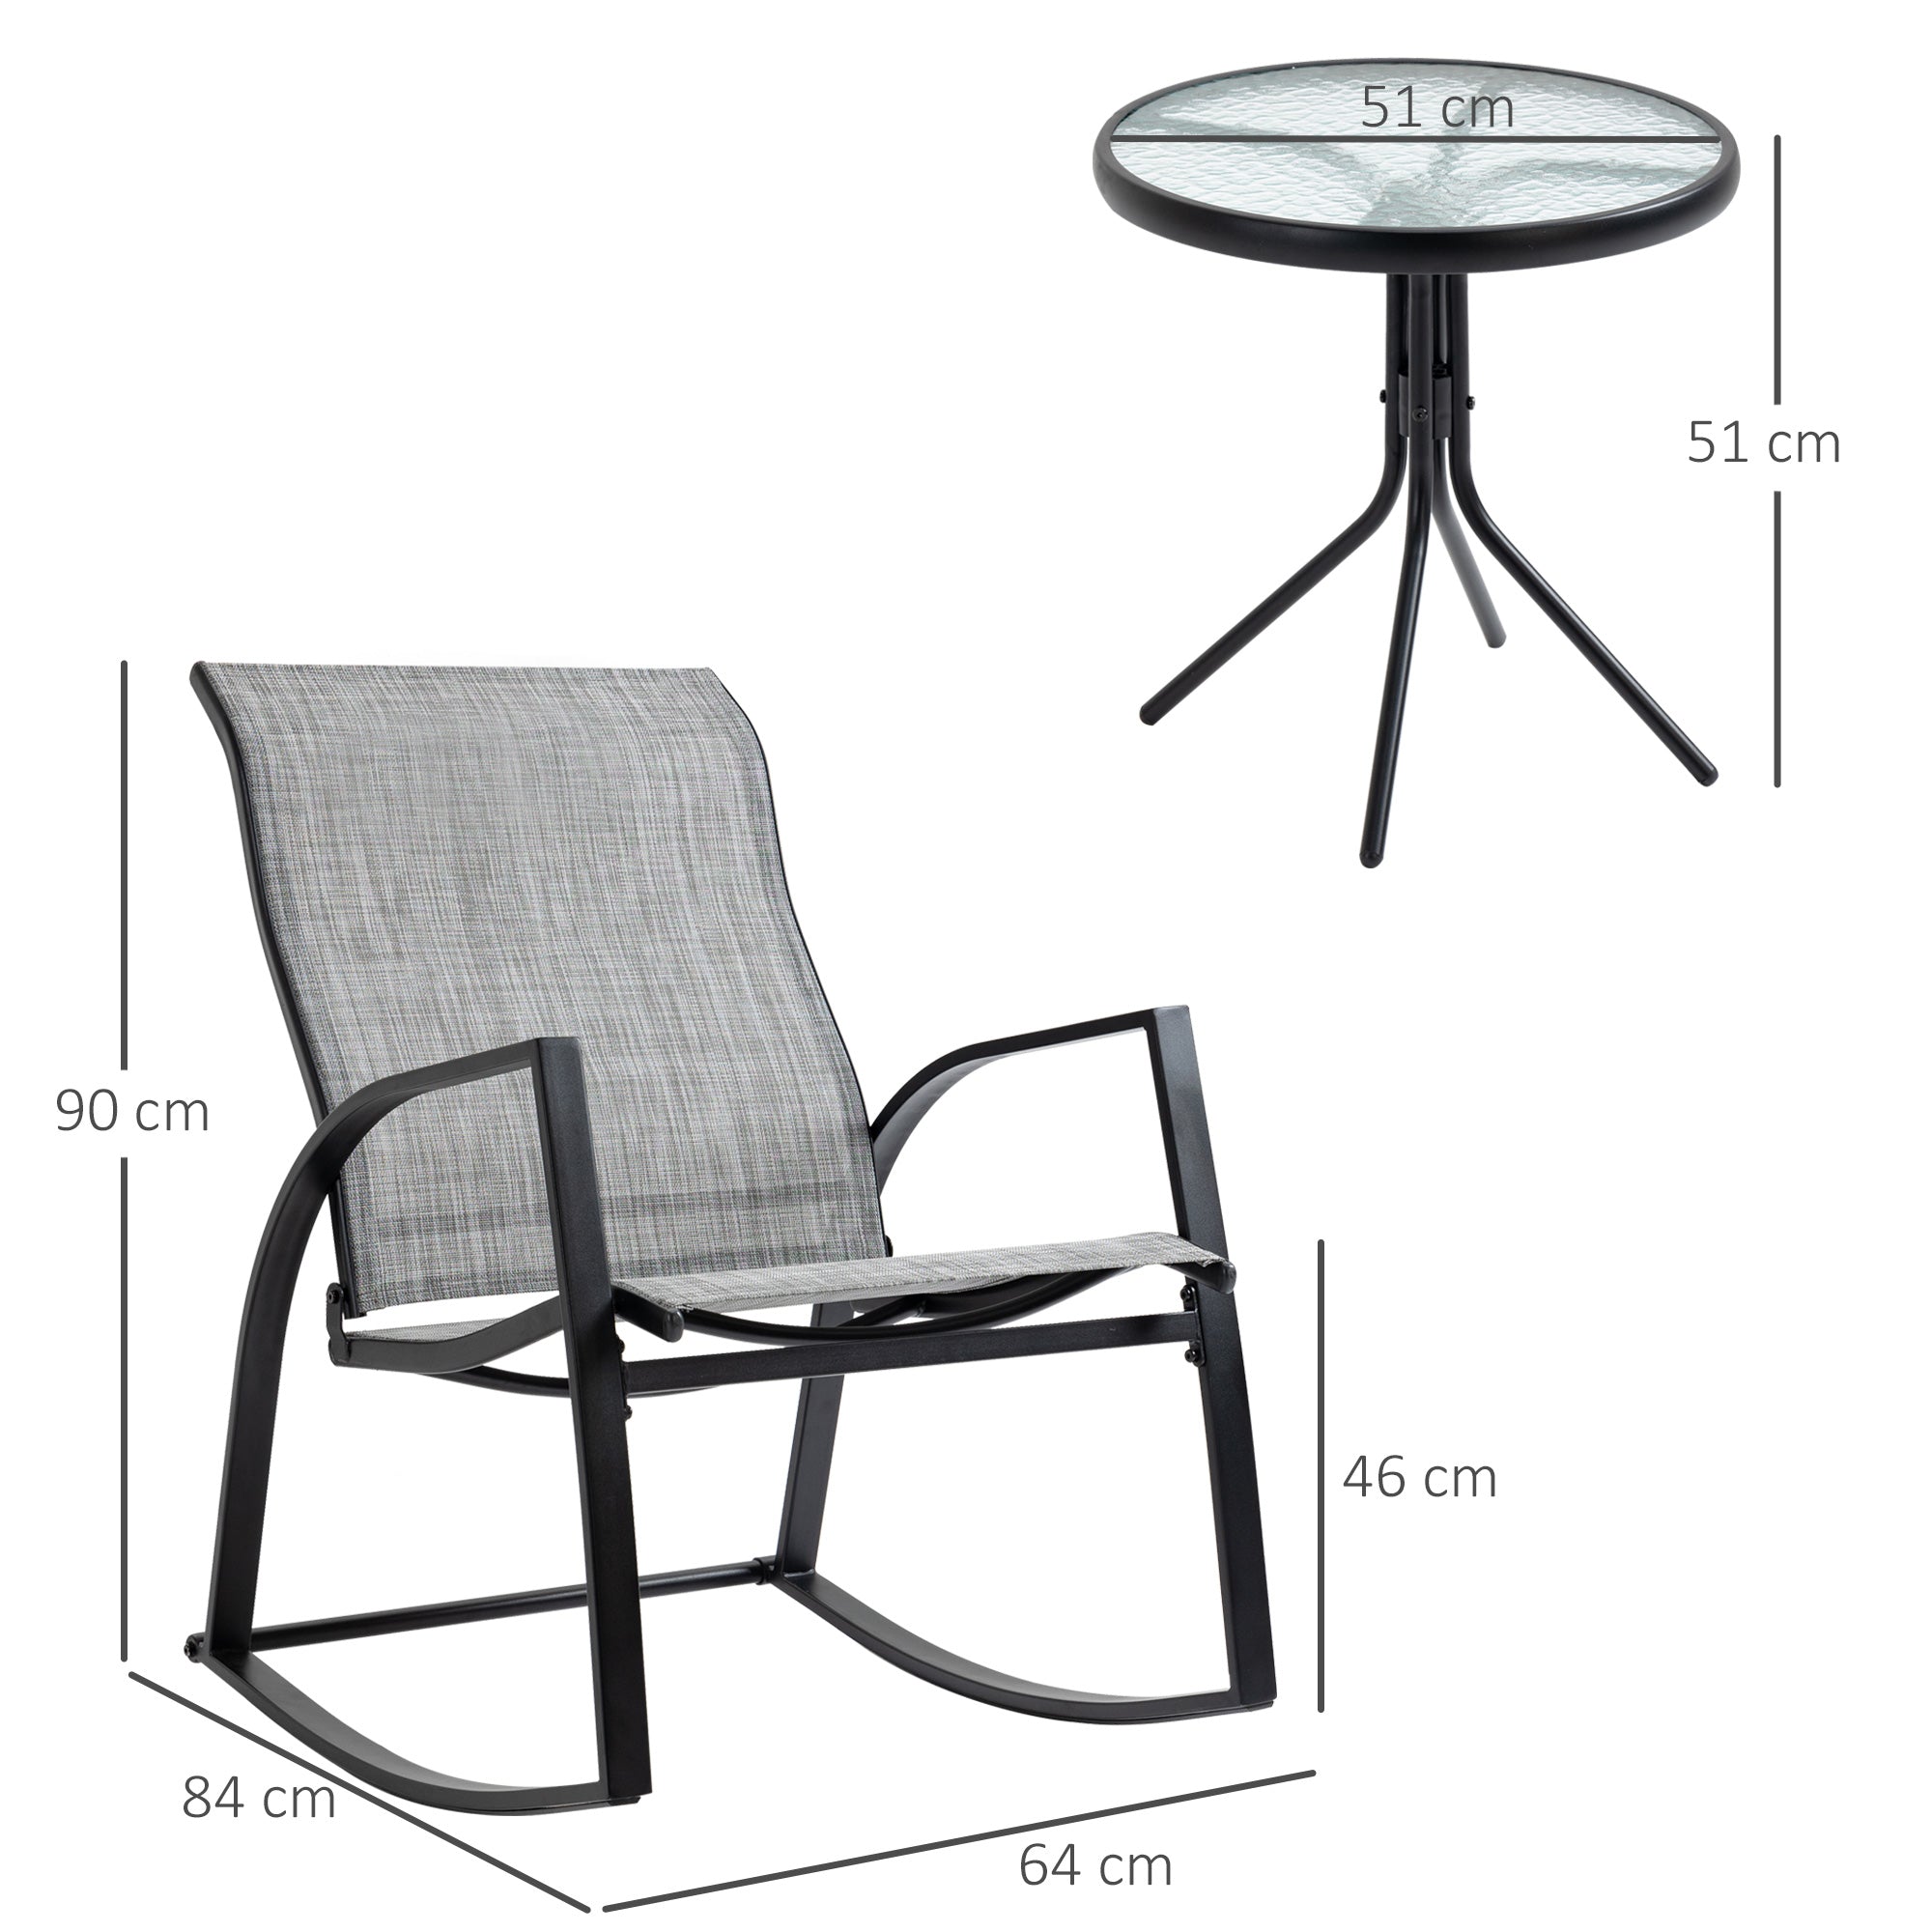 Outsunny 3 Pieces Outdoor Patio Bistro Set w/ 2 Rocking Chairs and Tempered Glass Table for Garden, Porch, Poolside, Grey - Inspirely